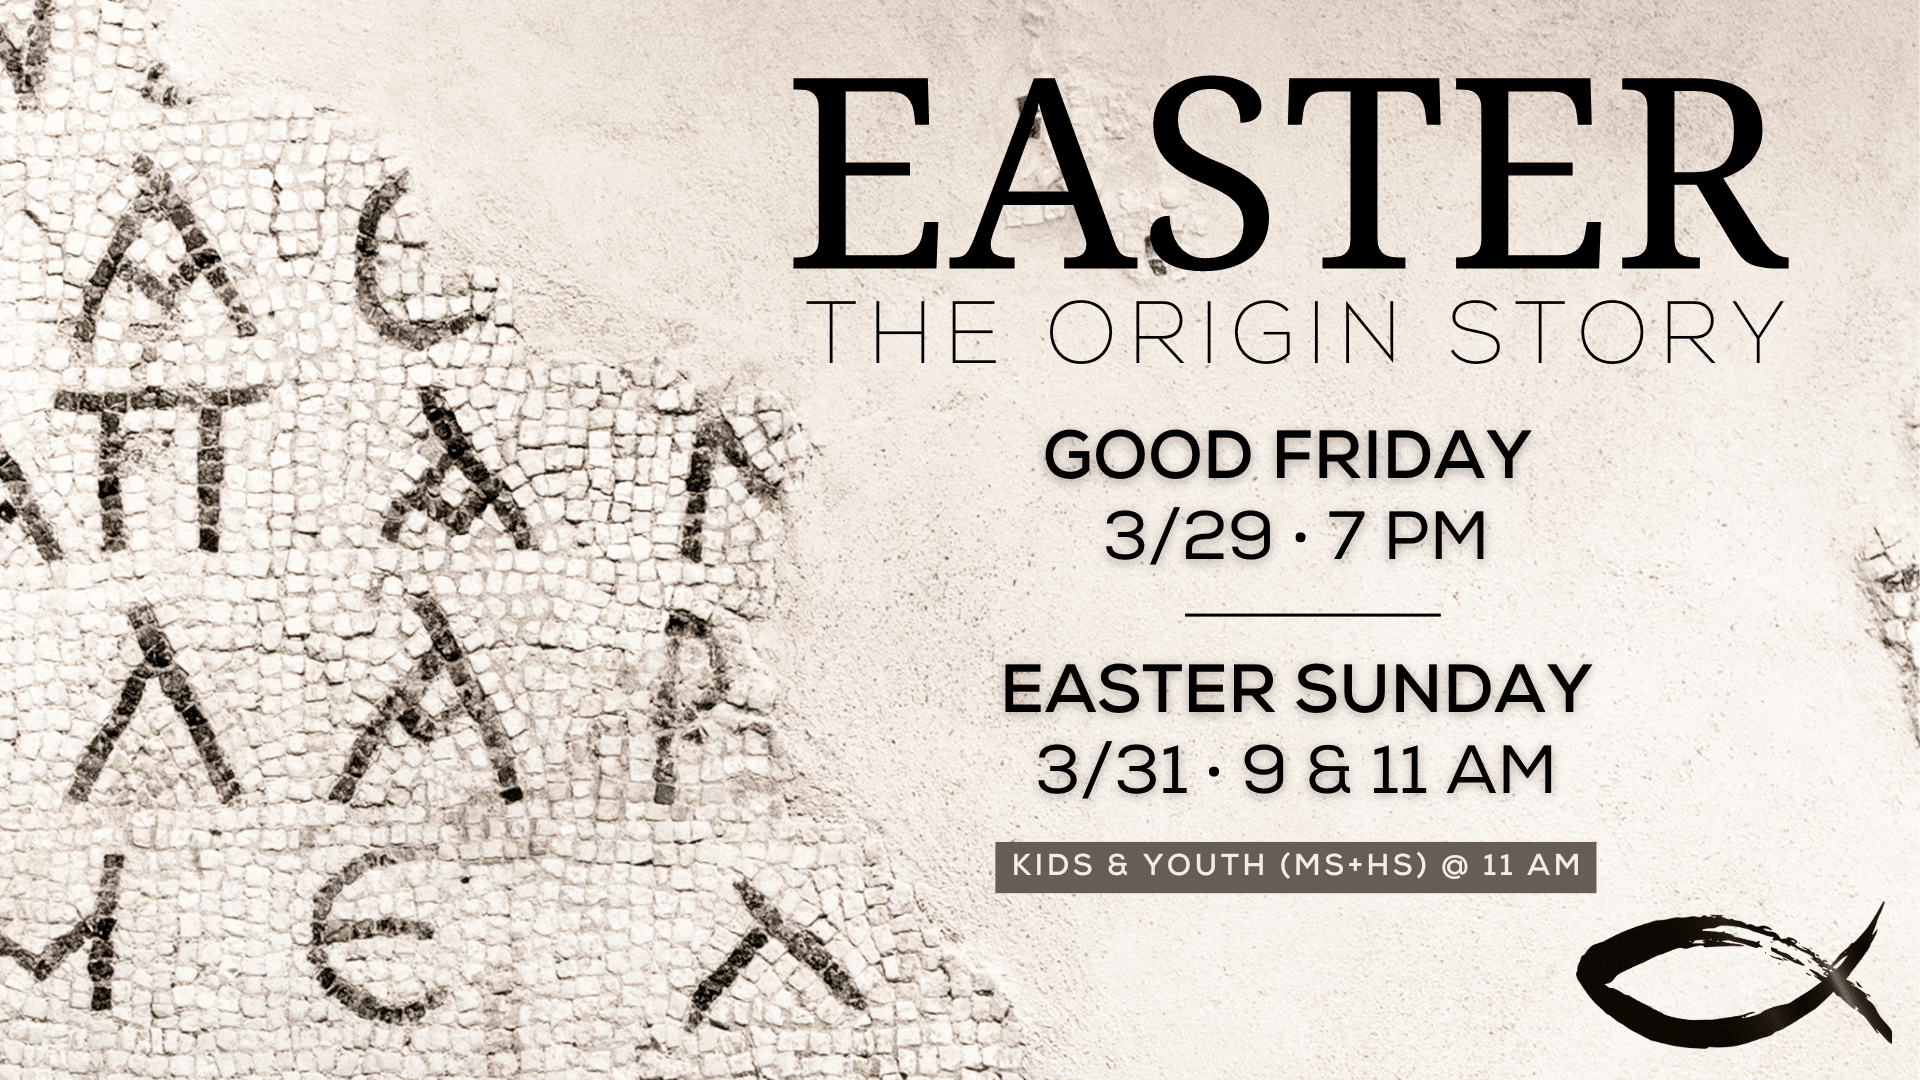 Good Friday service March 29 at 7:00 pm. Easter services March 31 at 9:00 and 11:00 am.